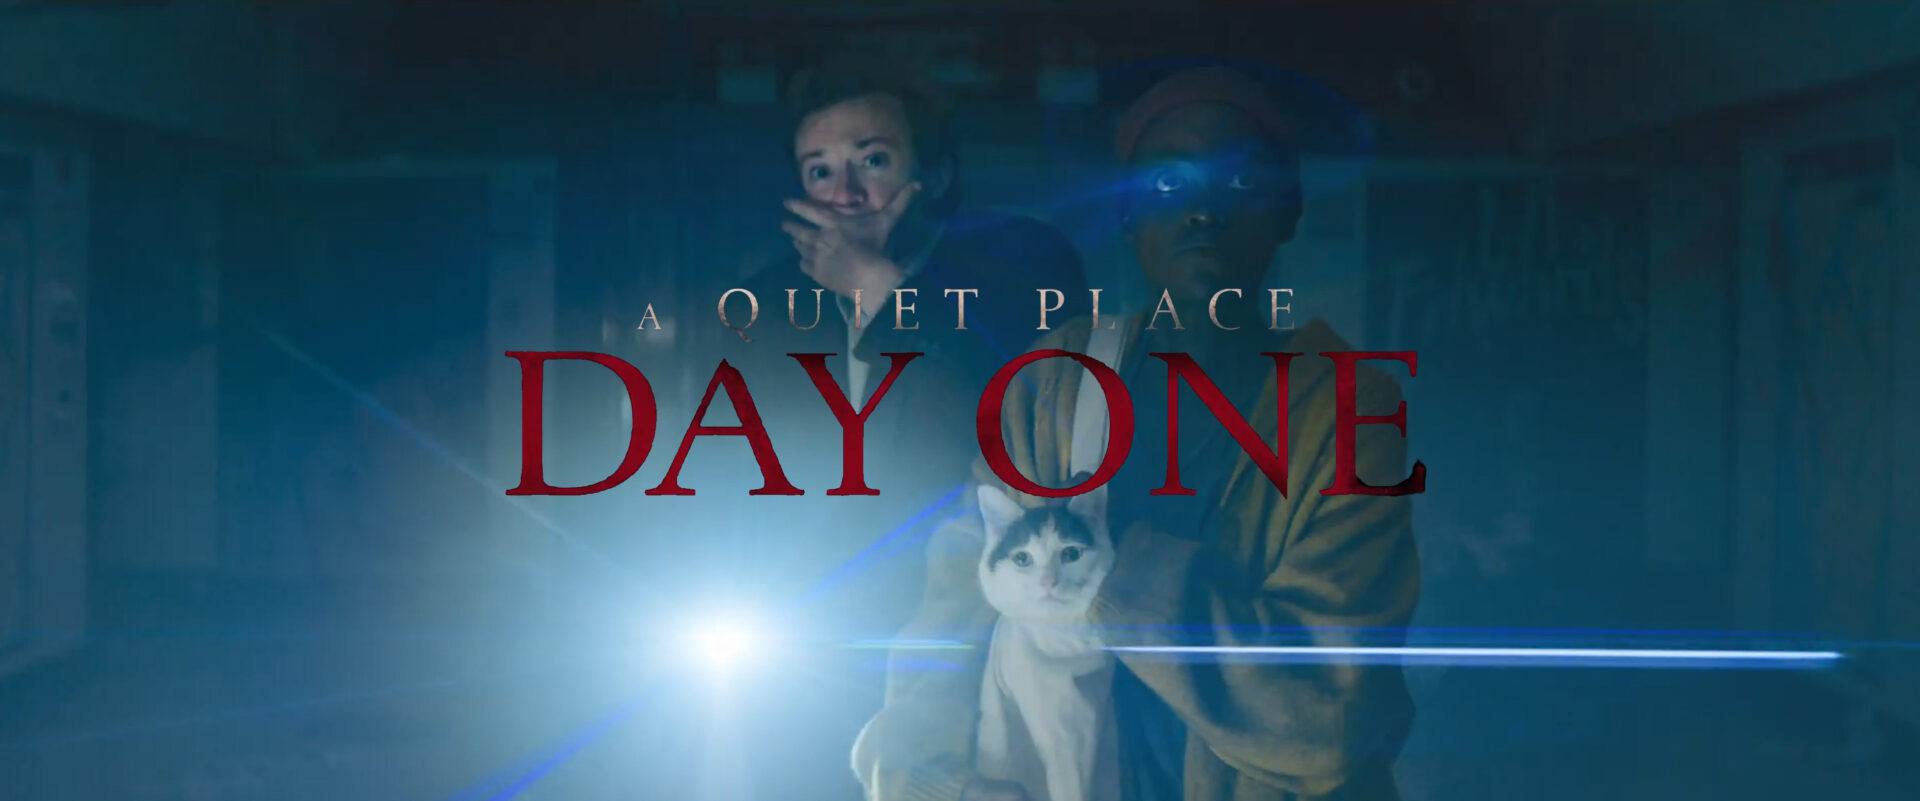 a quiet place day one trailer banner